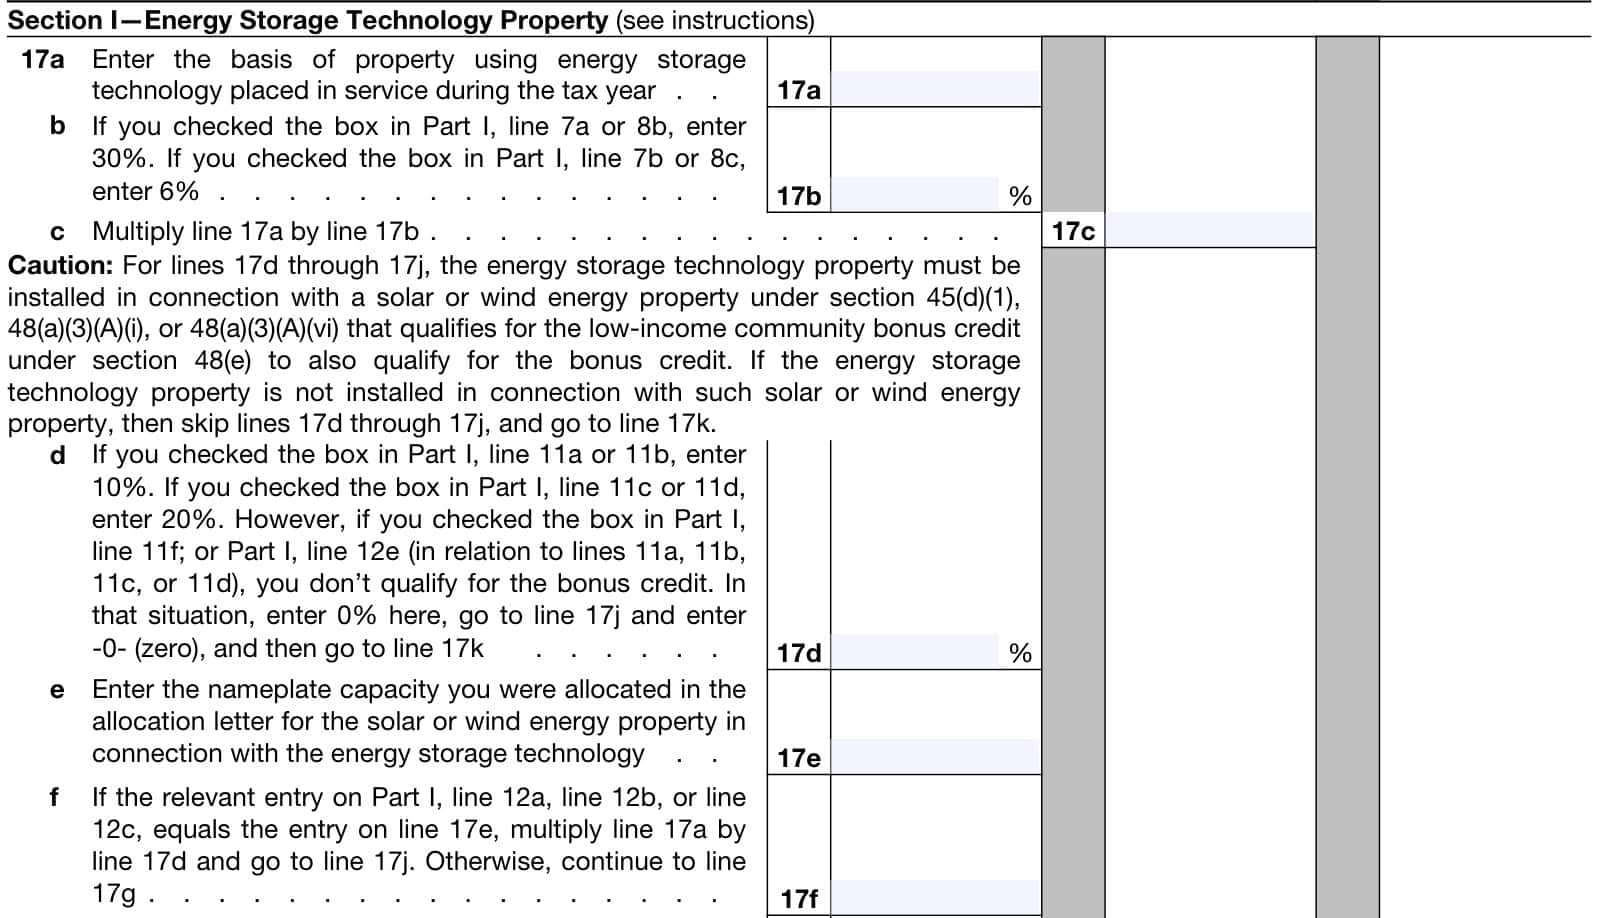 irs form 3468, part vi, section i: energy storage technology property